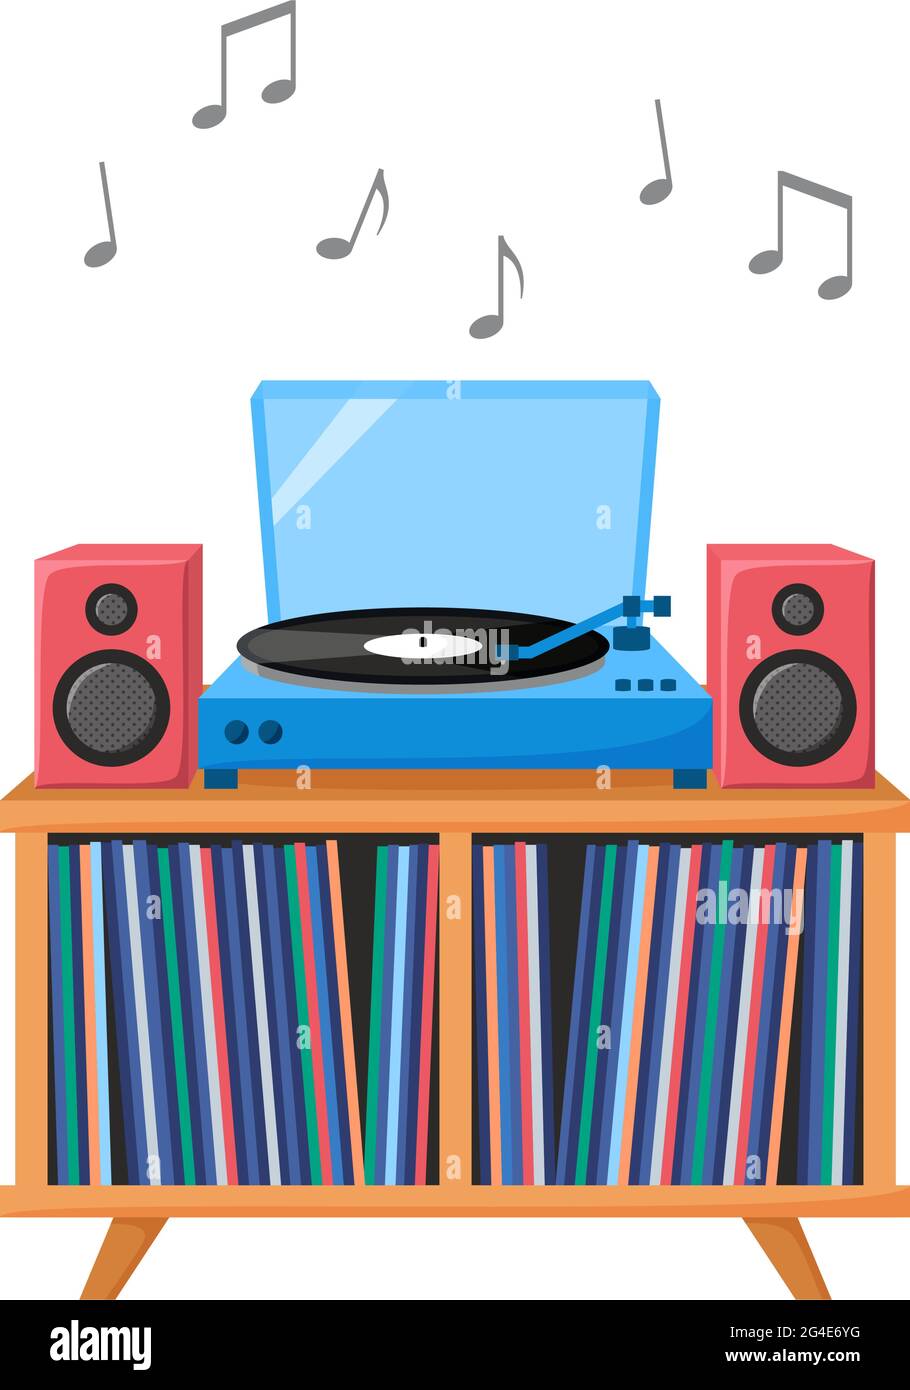 Turntable playing vinyl record. Retro audio device with acoustic system. Analog music player with vinyl collection. Vector Stock Vector